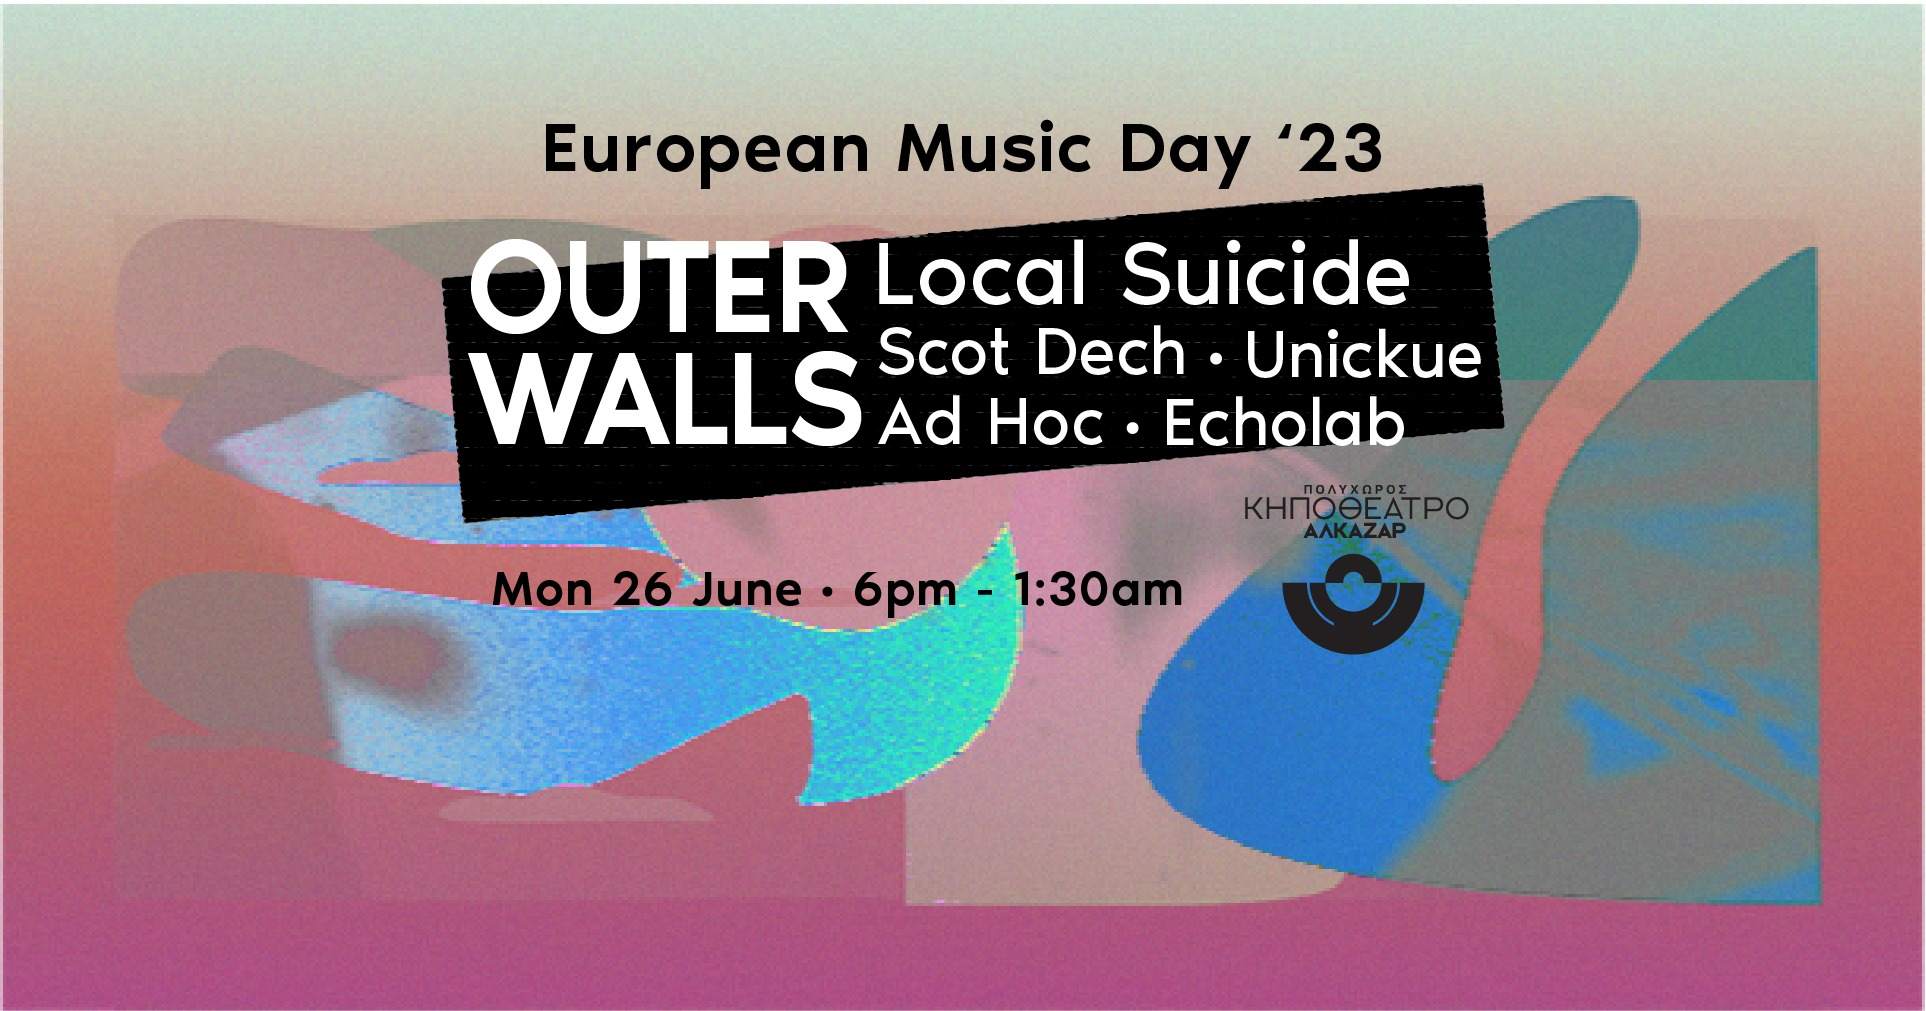 Outer Walls with Local Suicide, Scot Dech, Unickue - フライヤー表